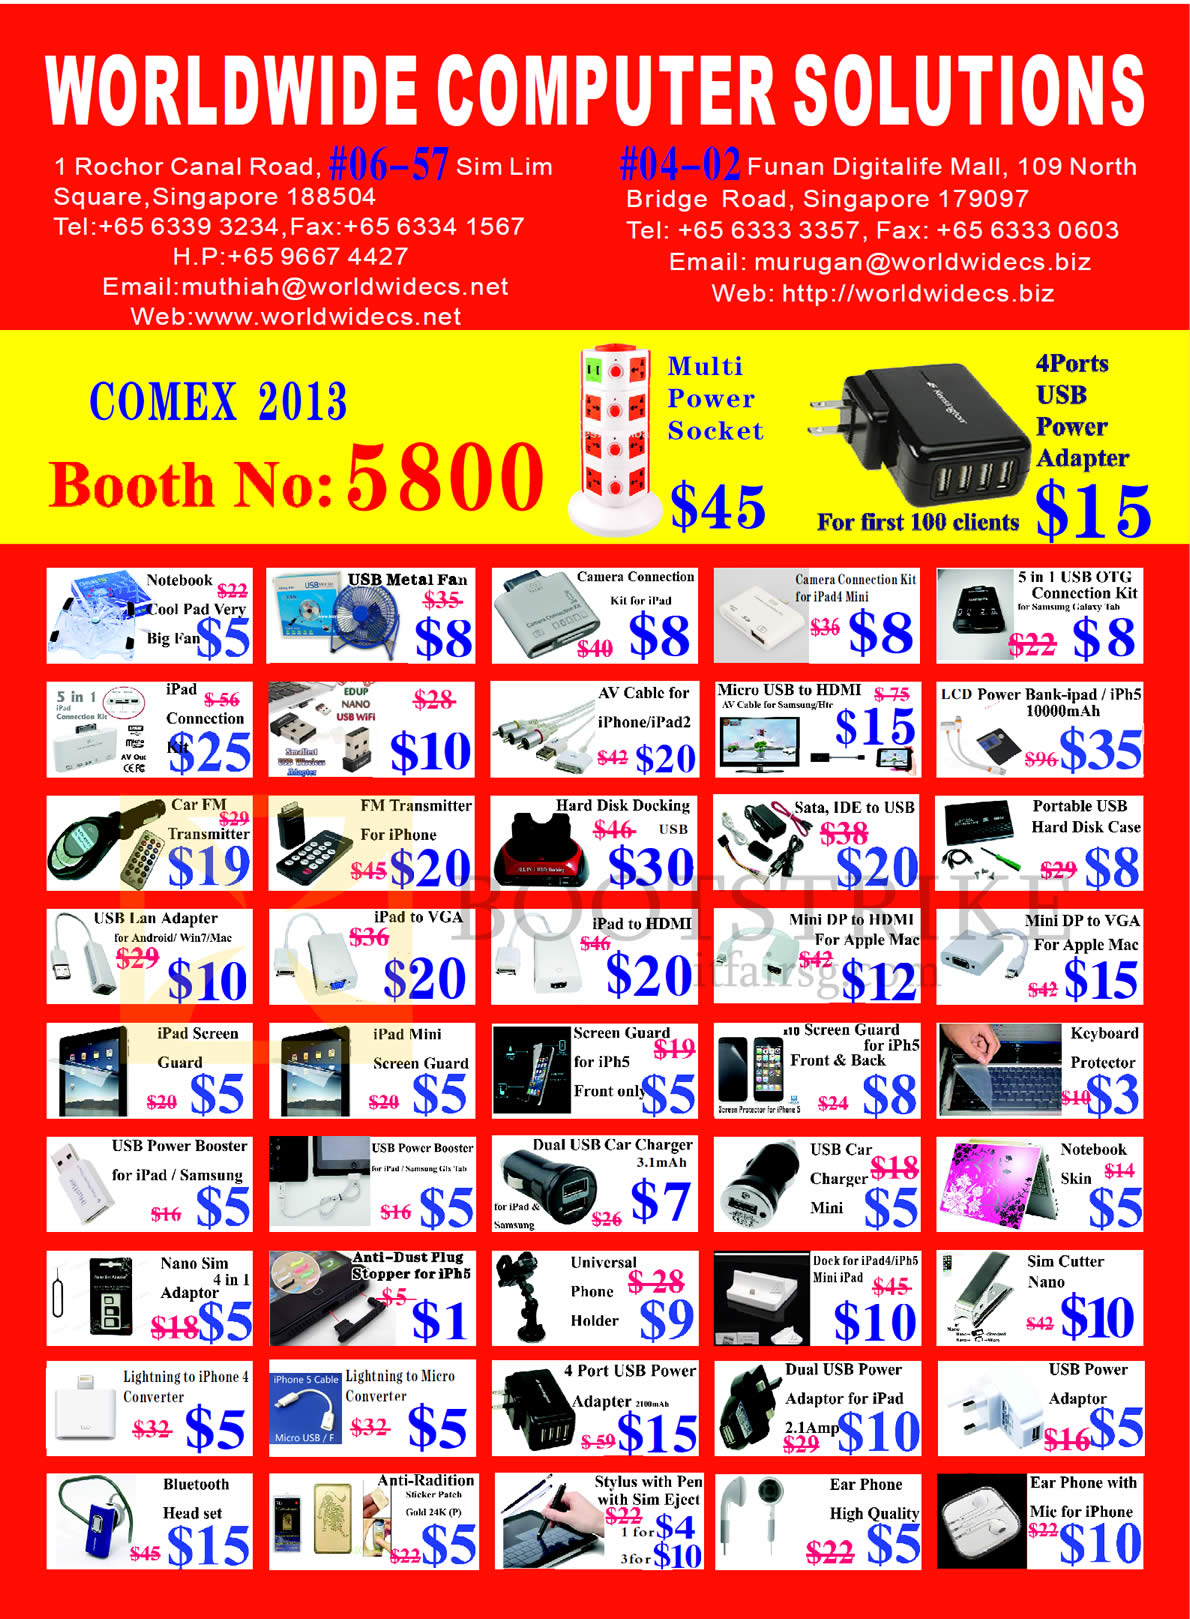 COMEX 2013 price list image brochure of Worldwide Computer Accessories Notebook Cooling Pad, USB, Camera Connection Kit, FM Transmitter, IPad, IPhone Screen Protector, Earphone, Skin, HDMI, Bluetooth Headset